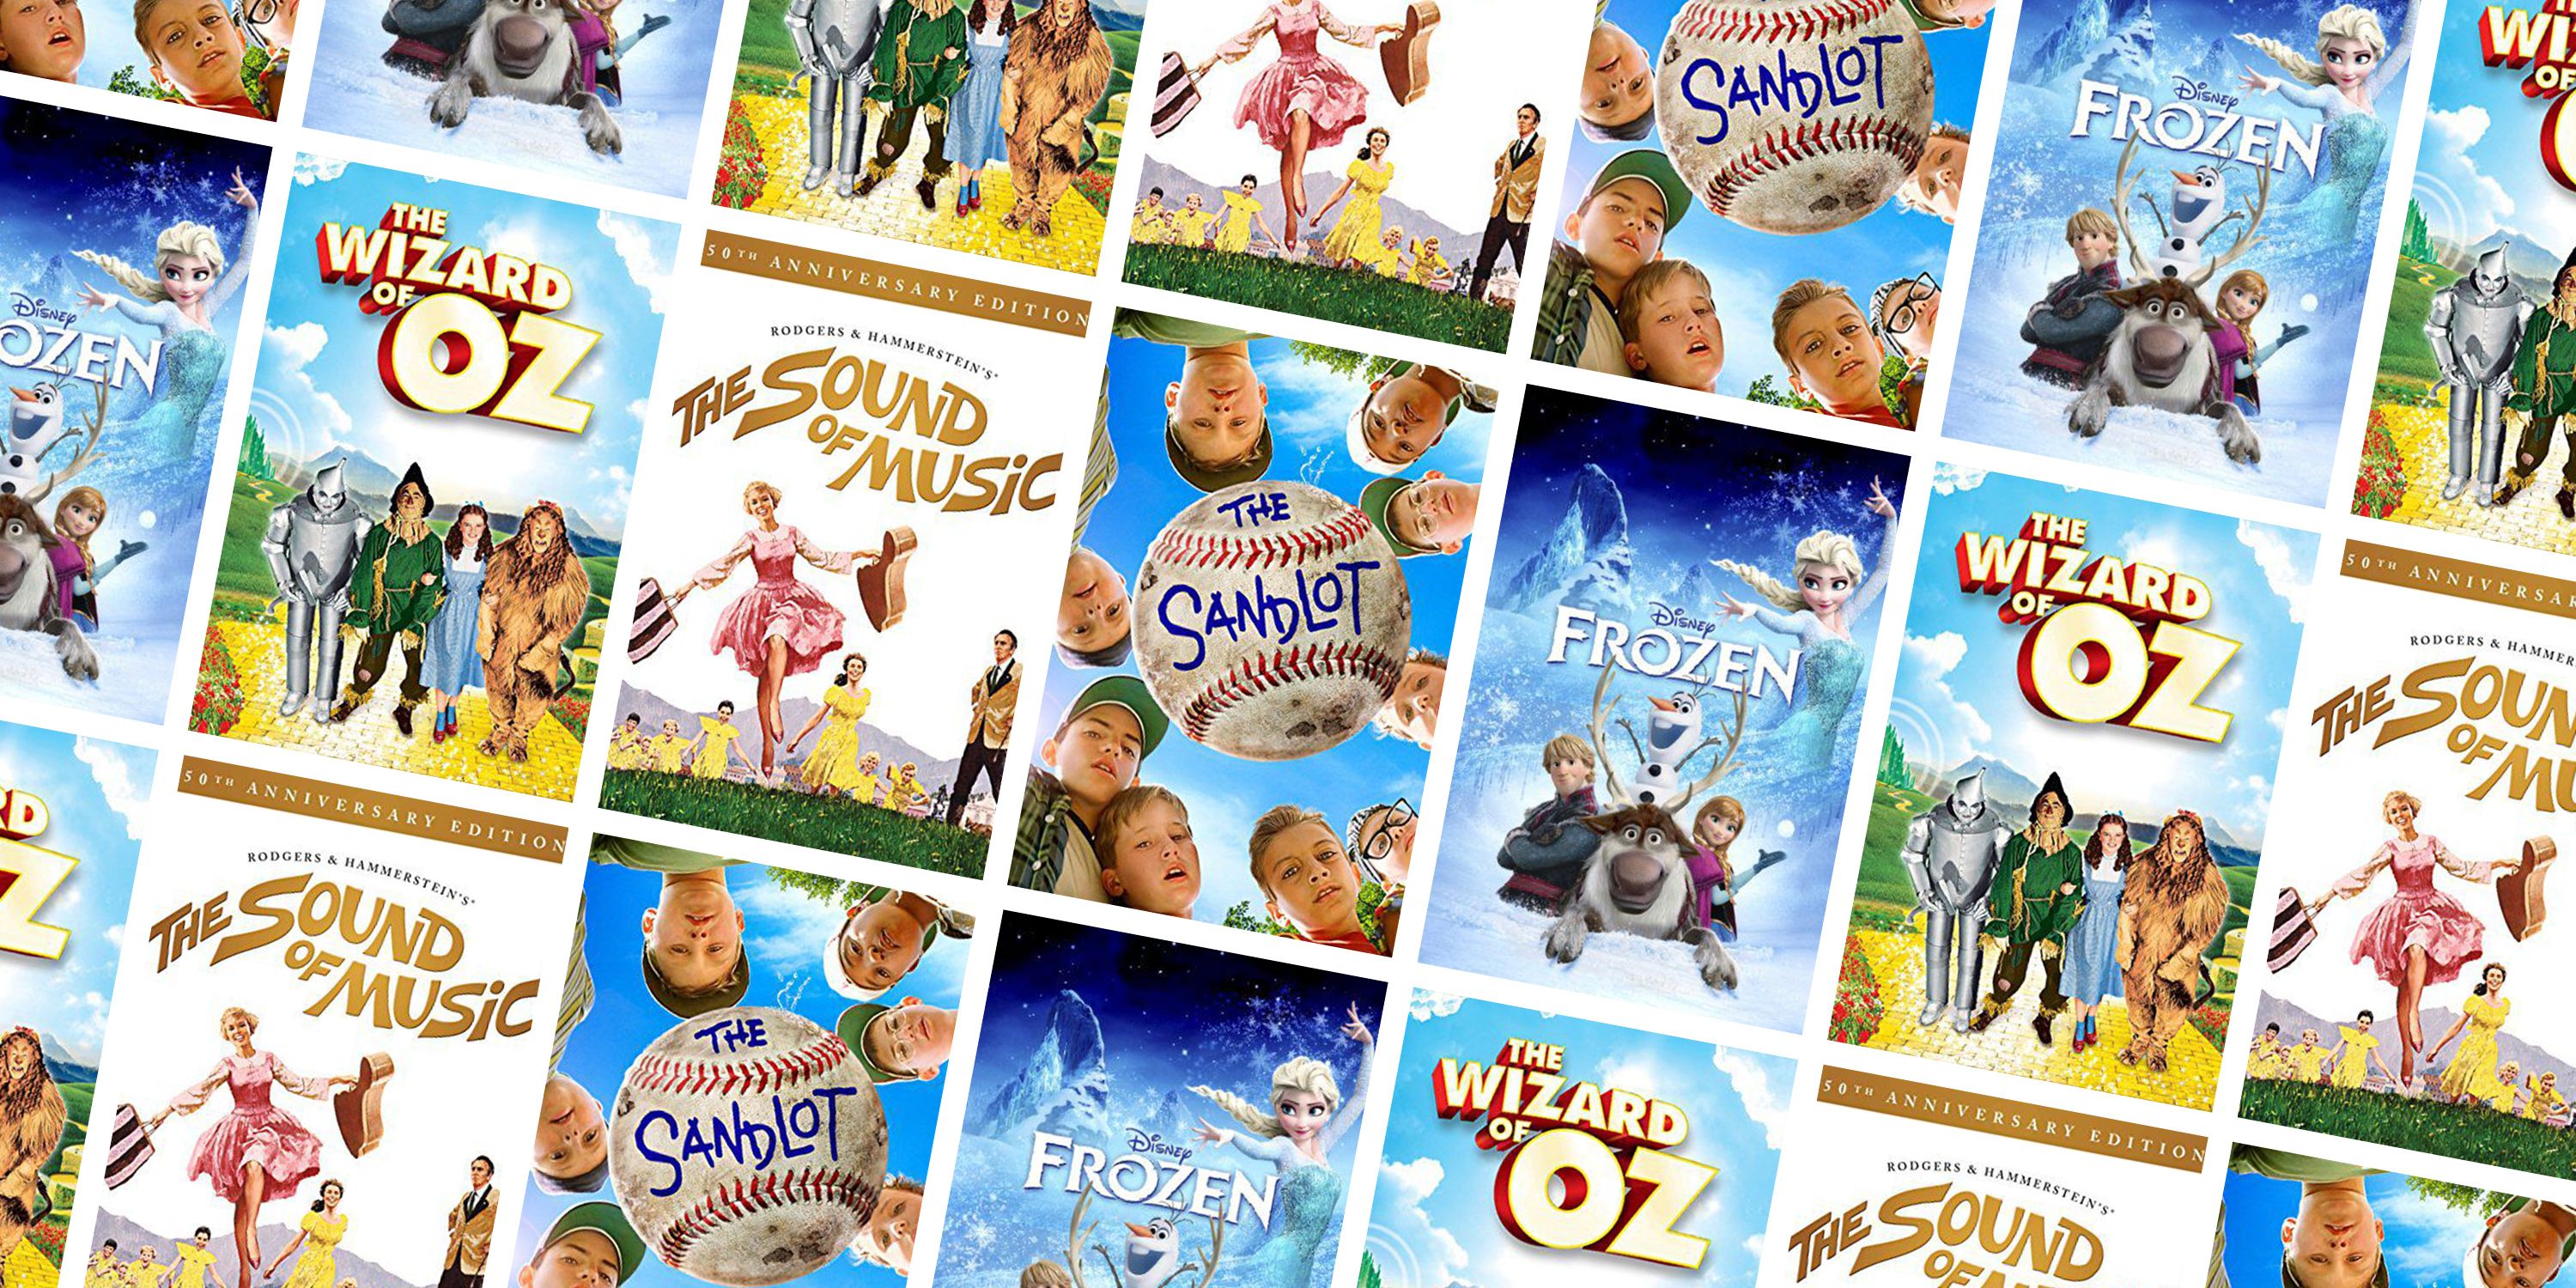 where download kids movies for free